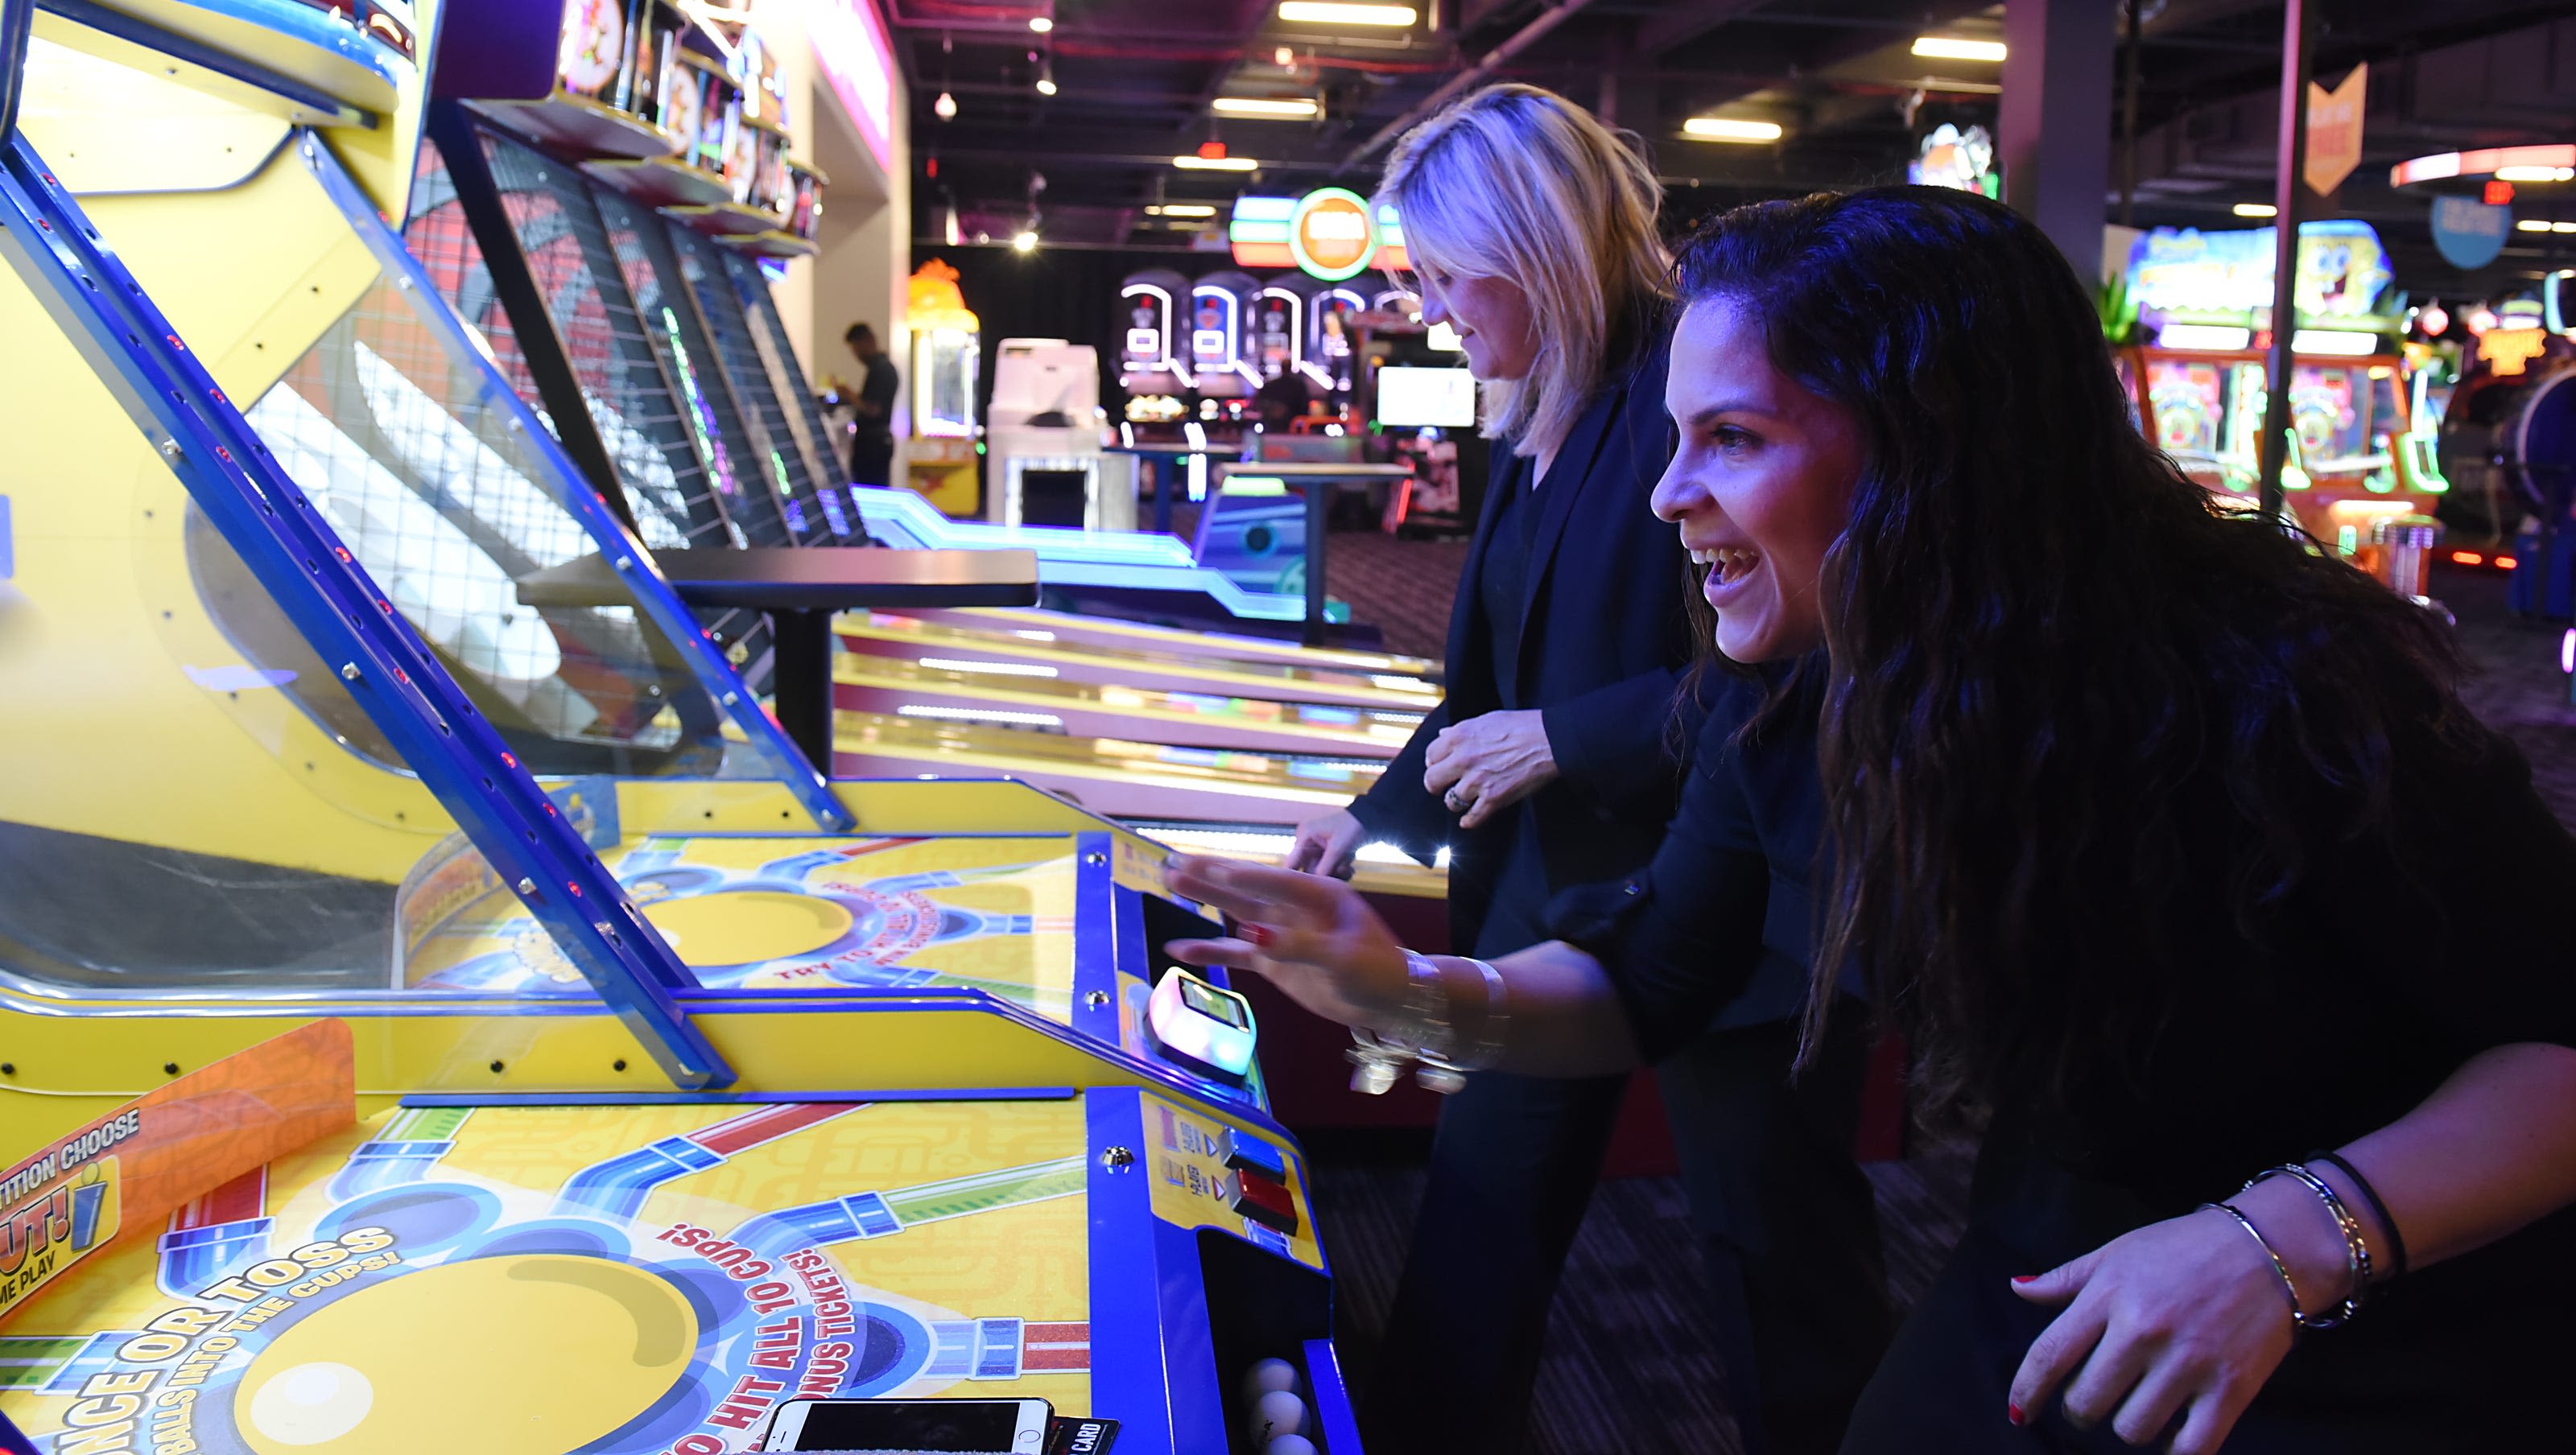 Dave & Buster's to offer arcade betting for customers. Here's how it will work